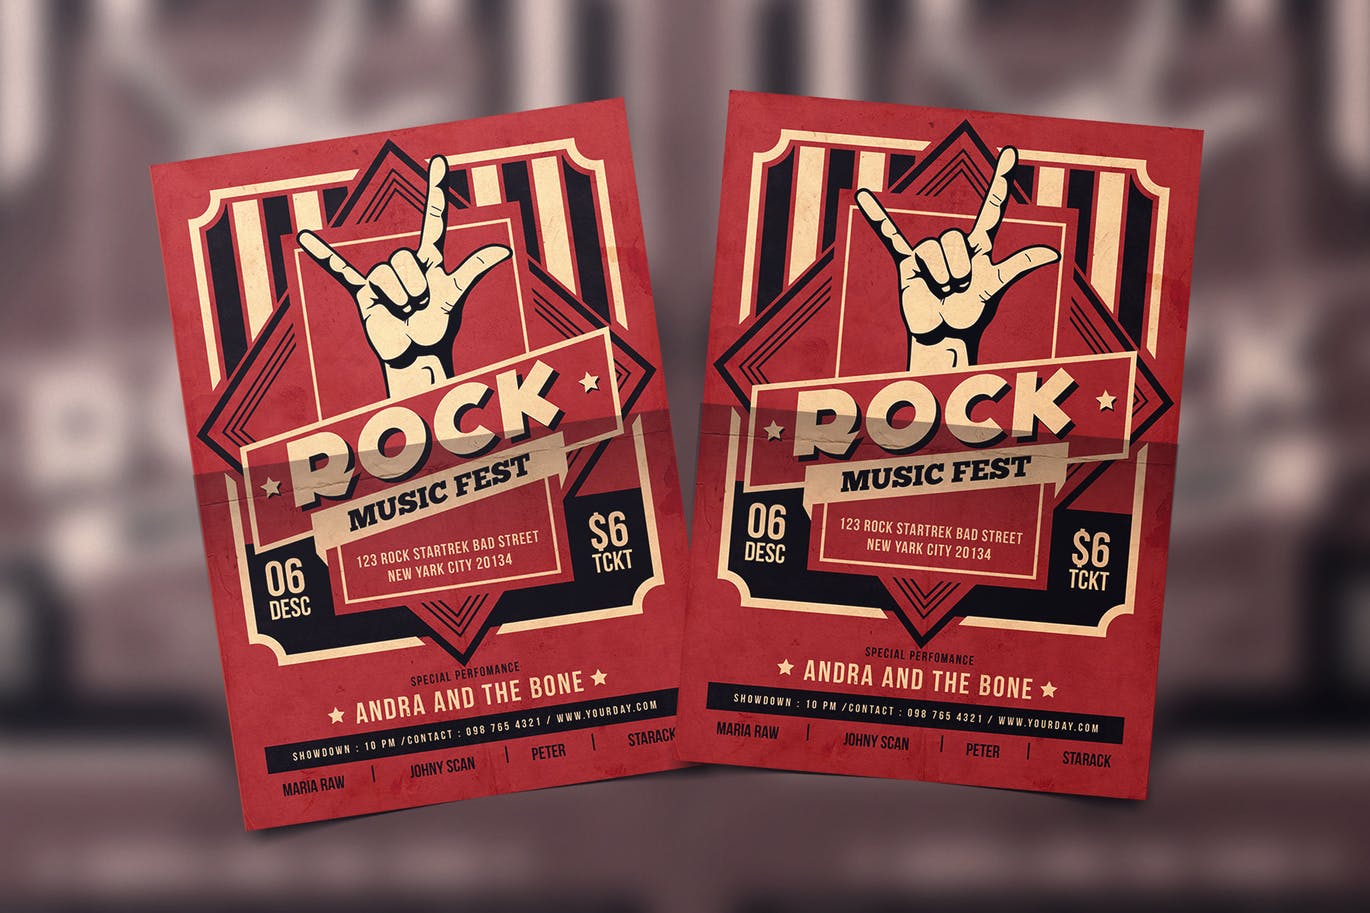 A red rock music fest flyer template